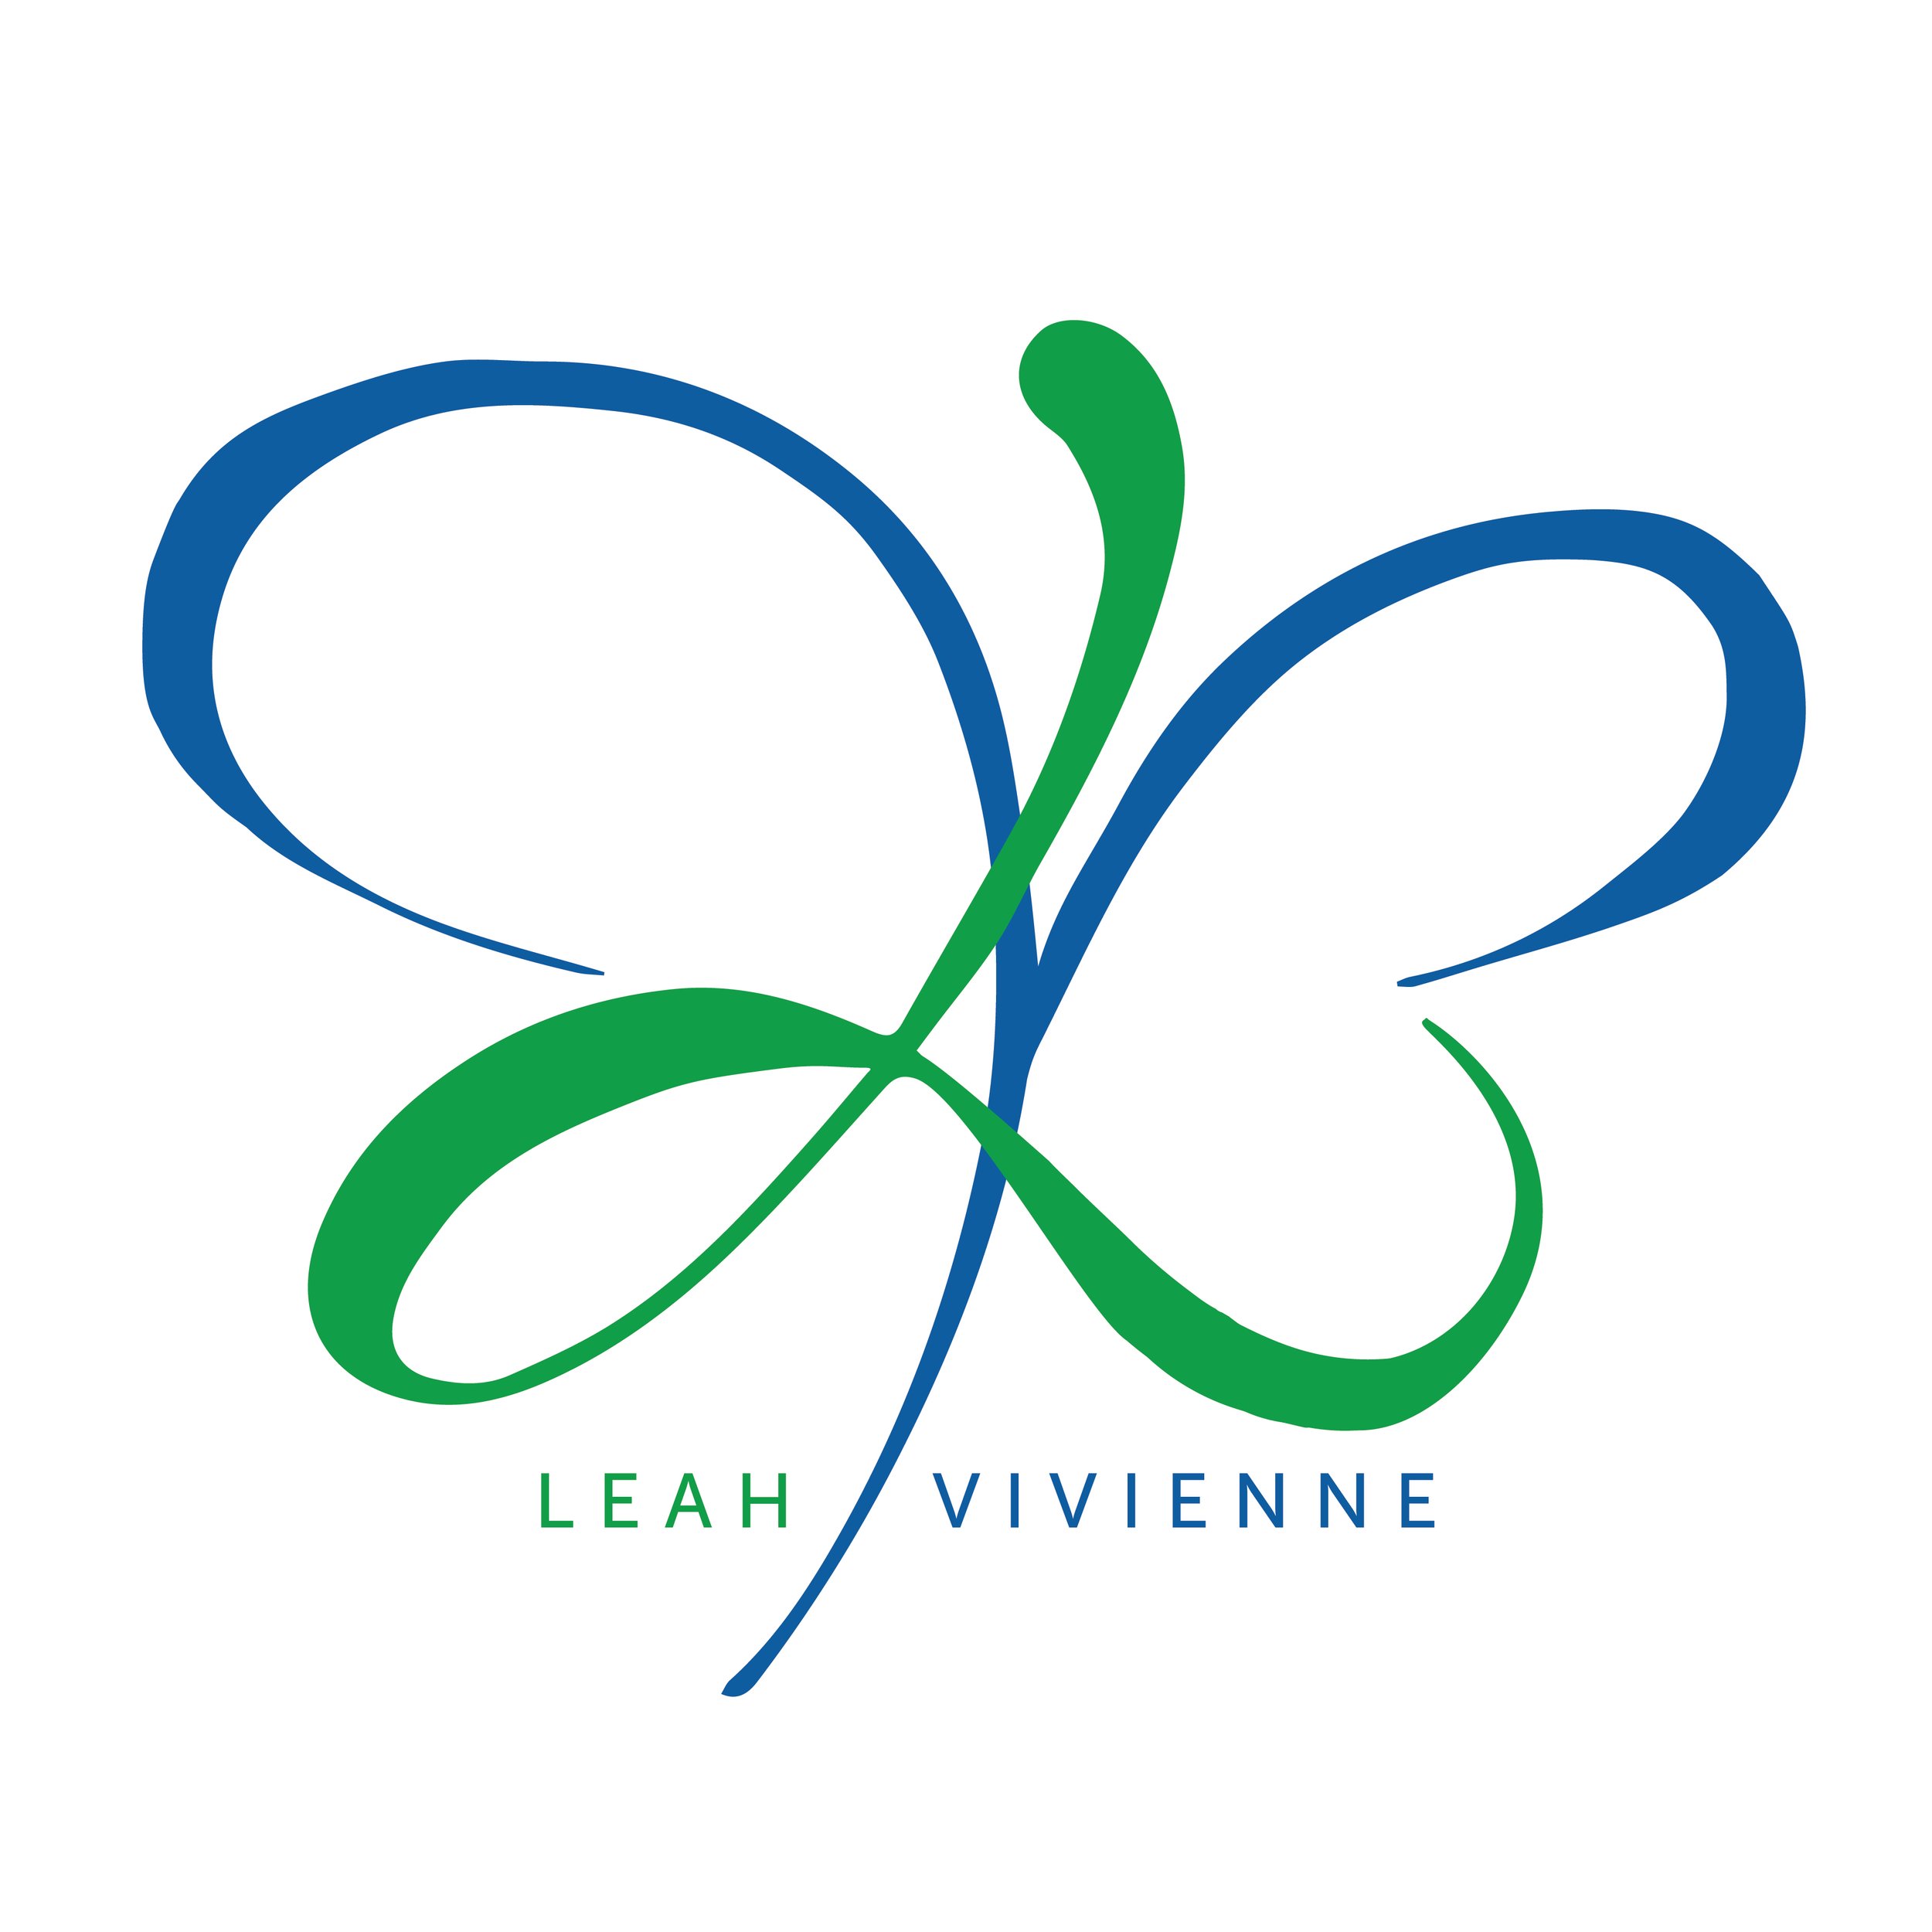 Leah and Vivienne Butterfly logo